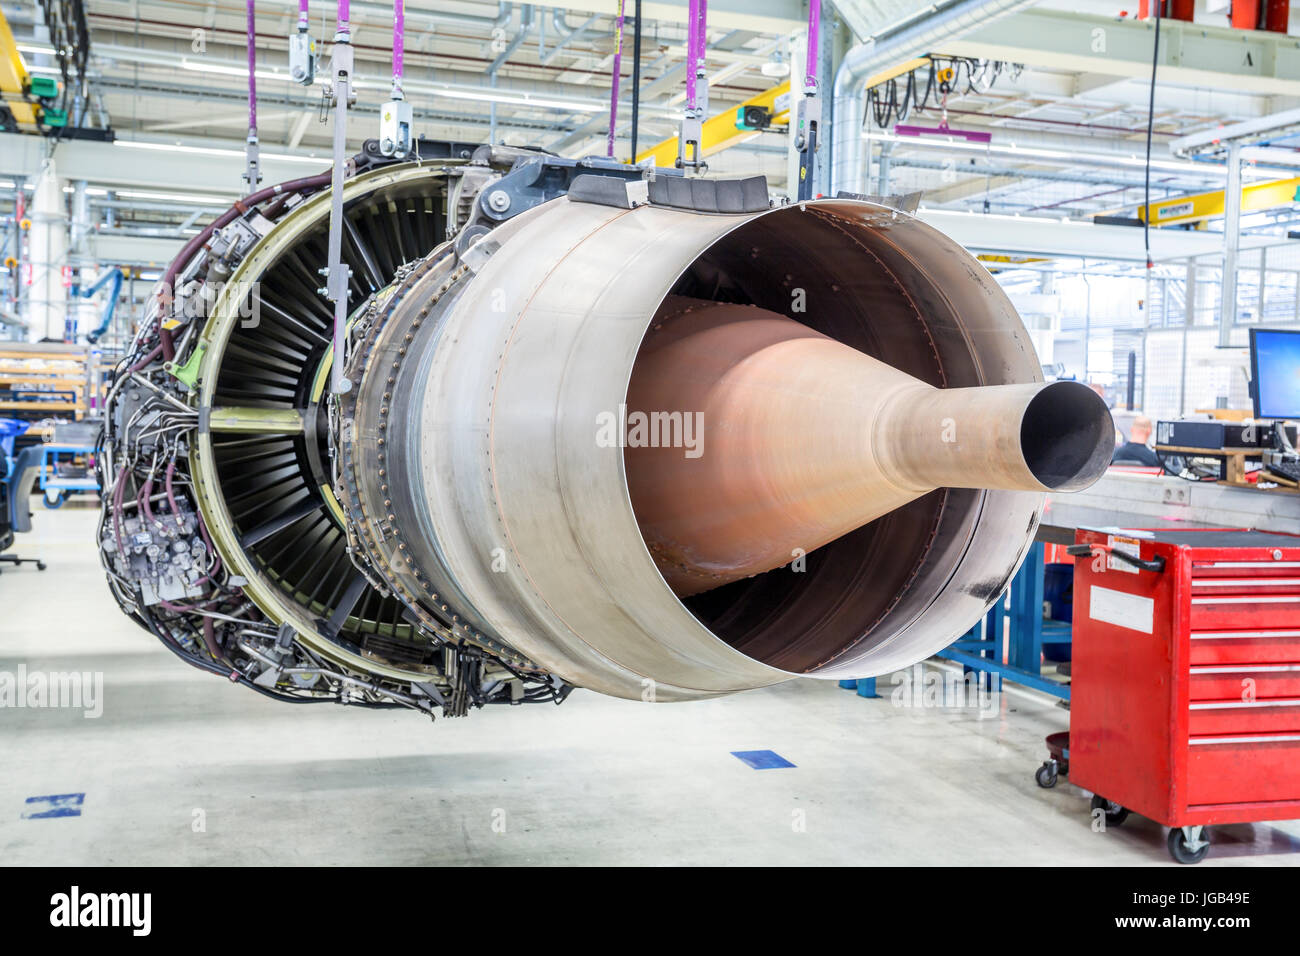 An airplane engine during maintenance in a warehouse Stock Photo